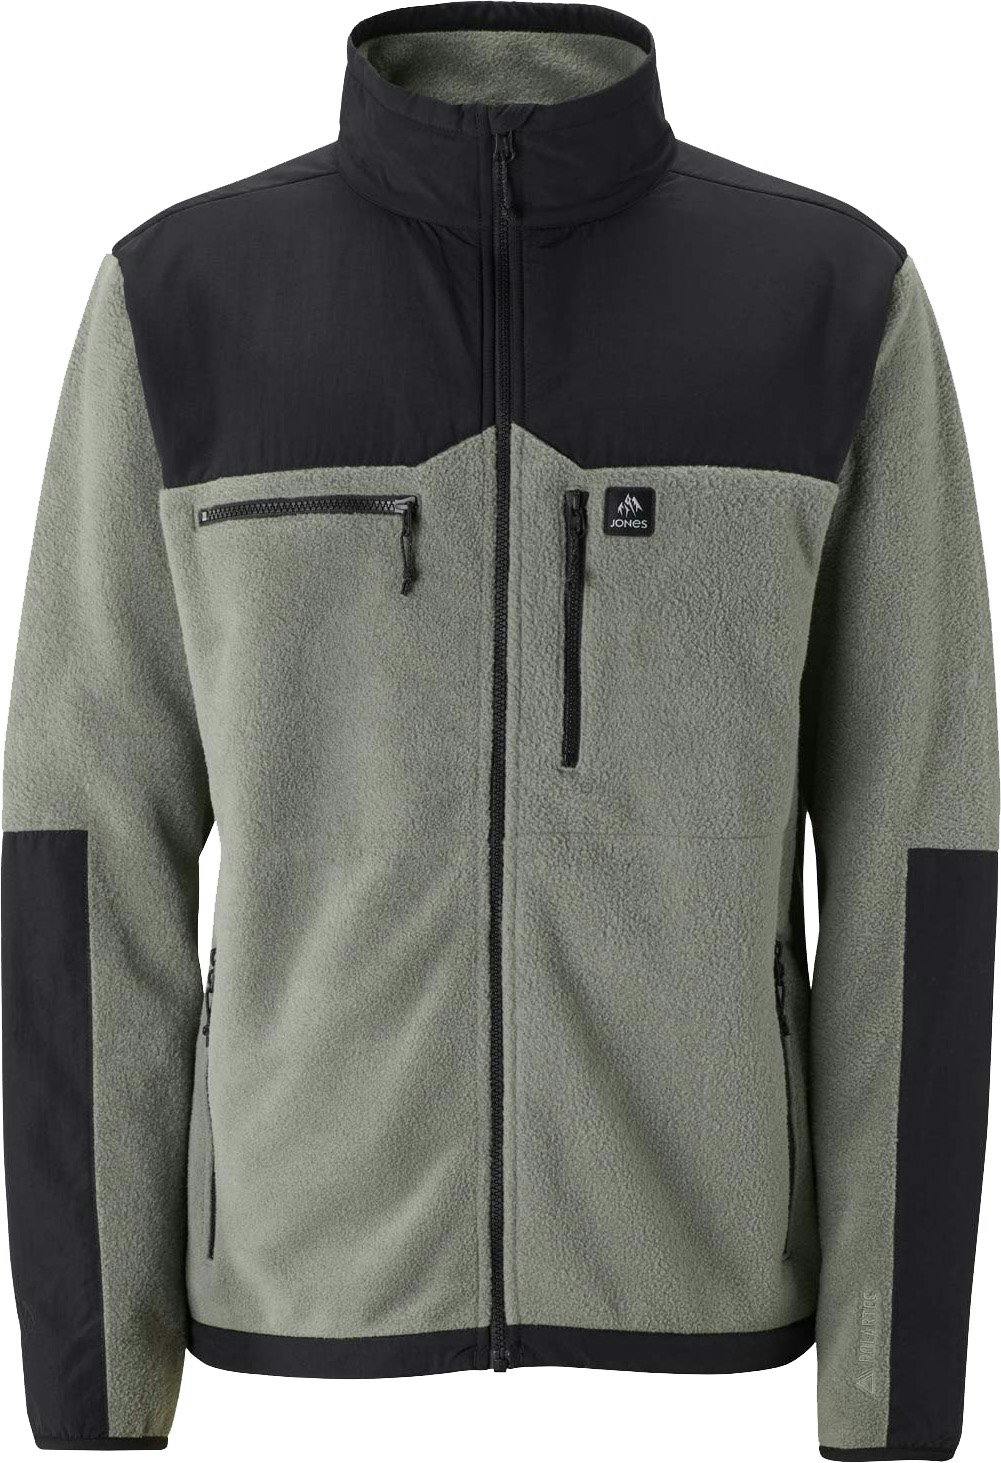 Product image for Base Camp Recycled Fleece Jacket - Men's